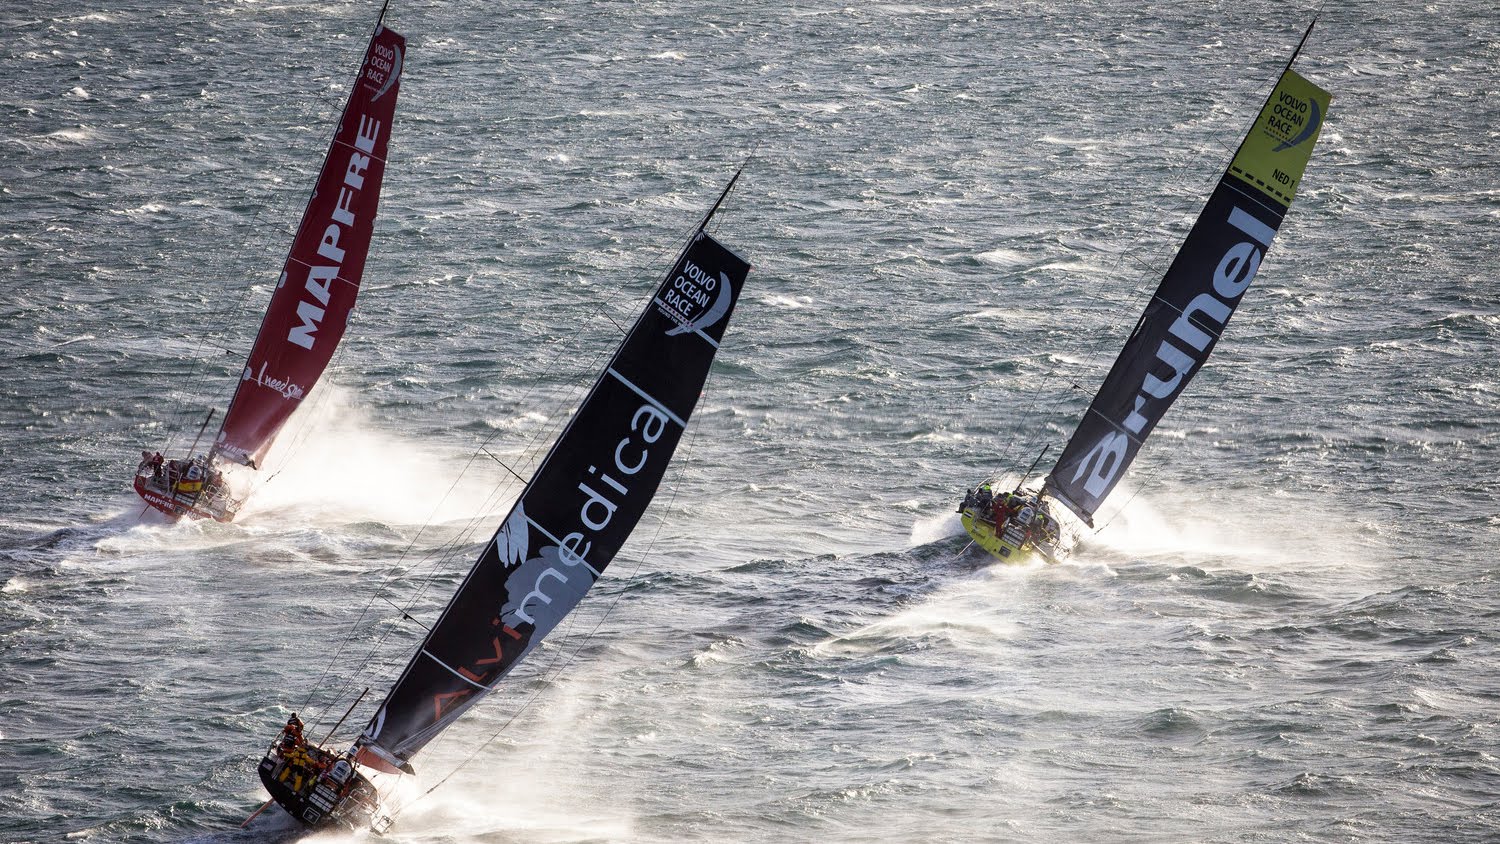 From Cape Town to Abu Dhabi – Leg 2 Review | Volvo Ocean Race 2014-15